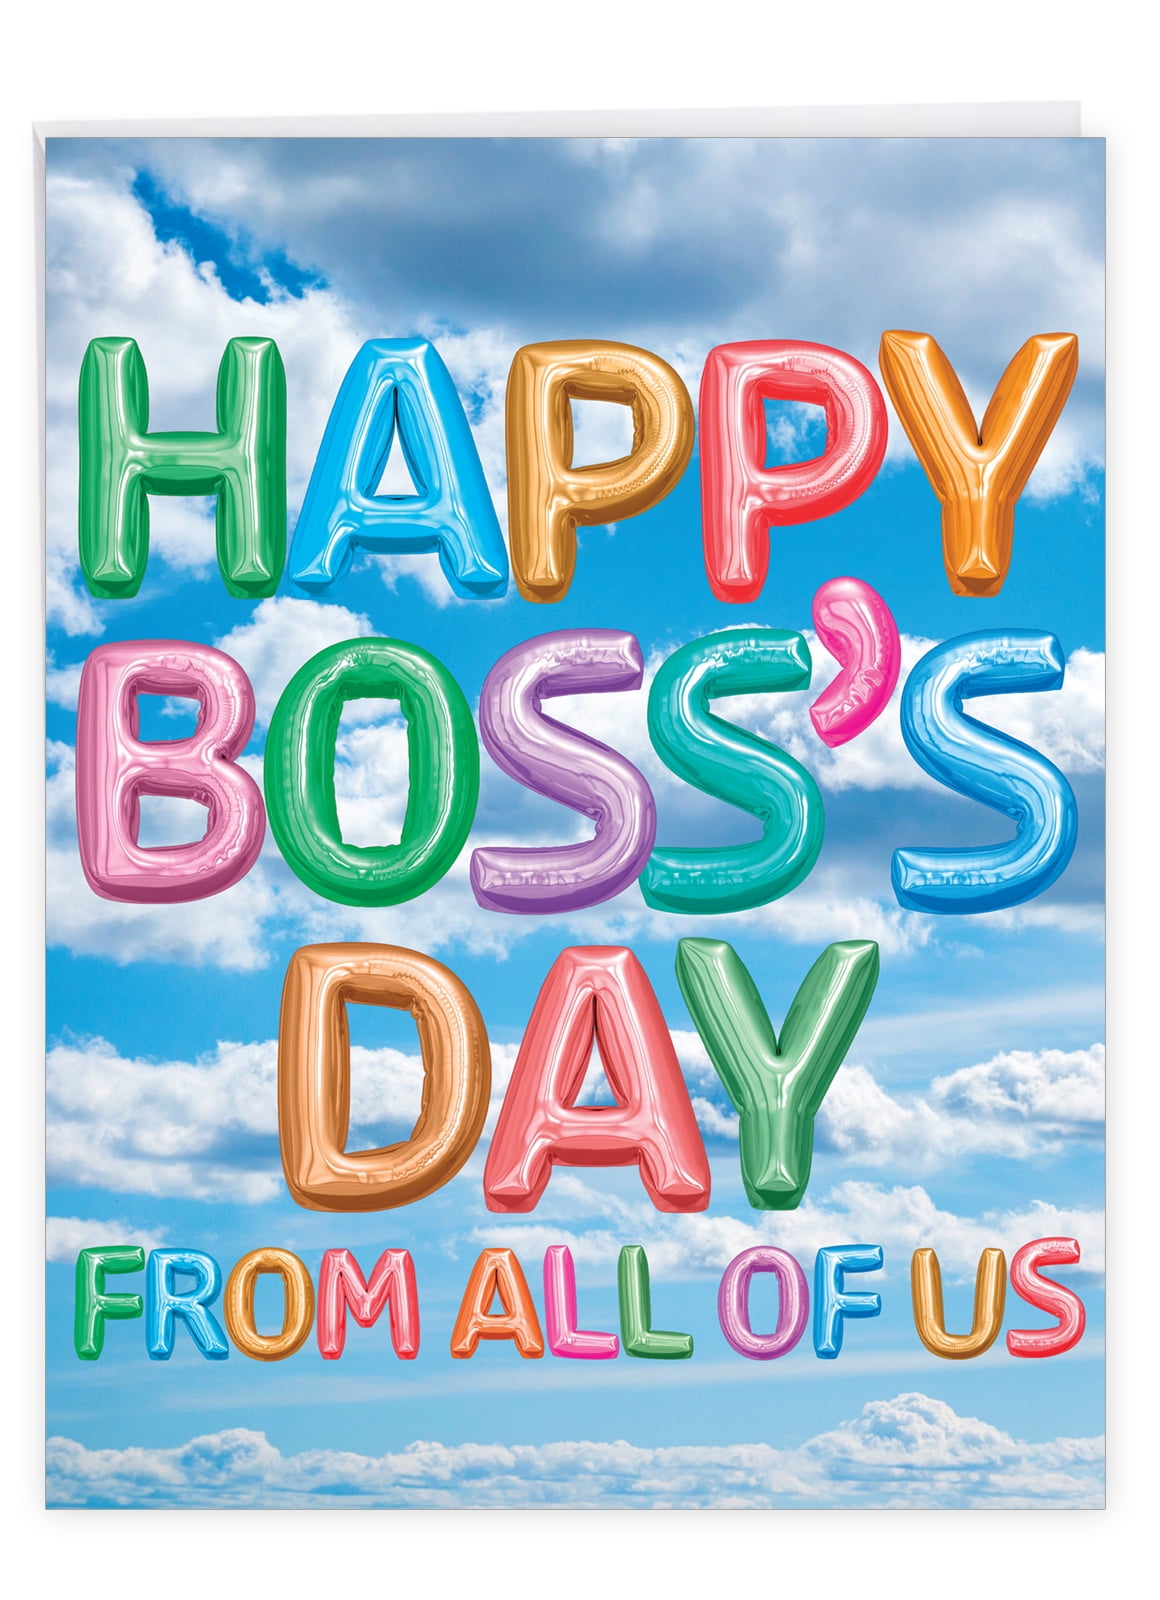 Big Happy Boss's Day Card (8.5 x 11 Inch) - Group Greeting Card for ...